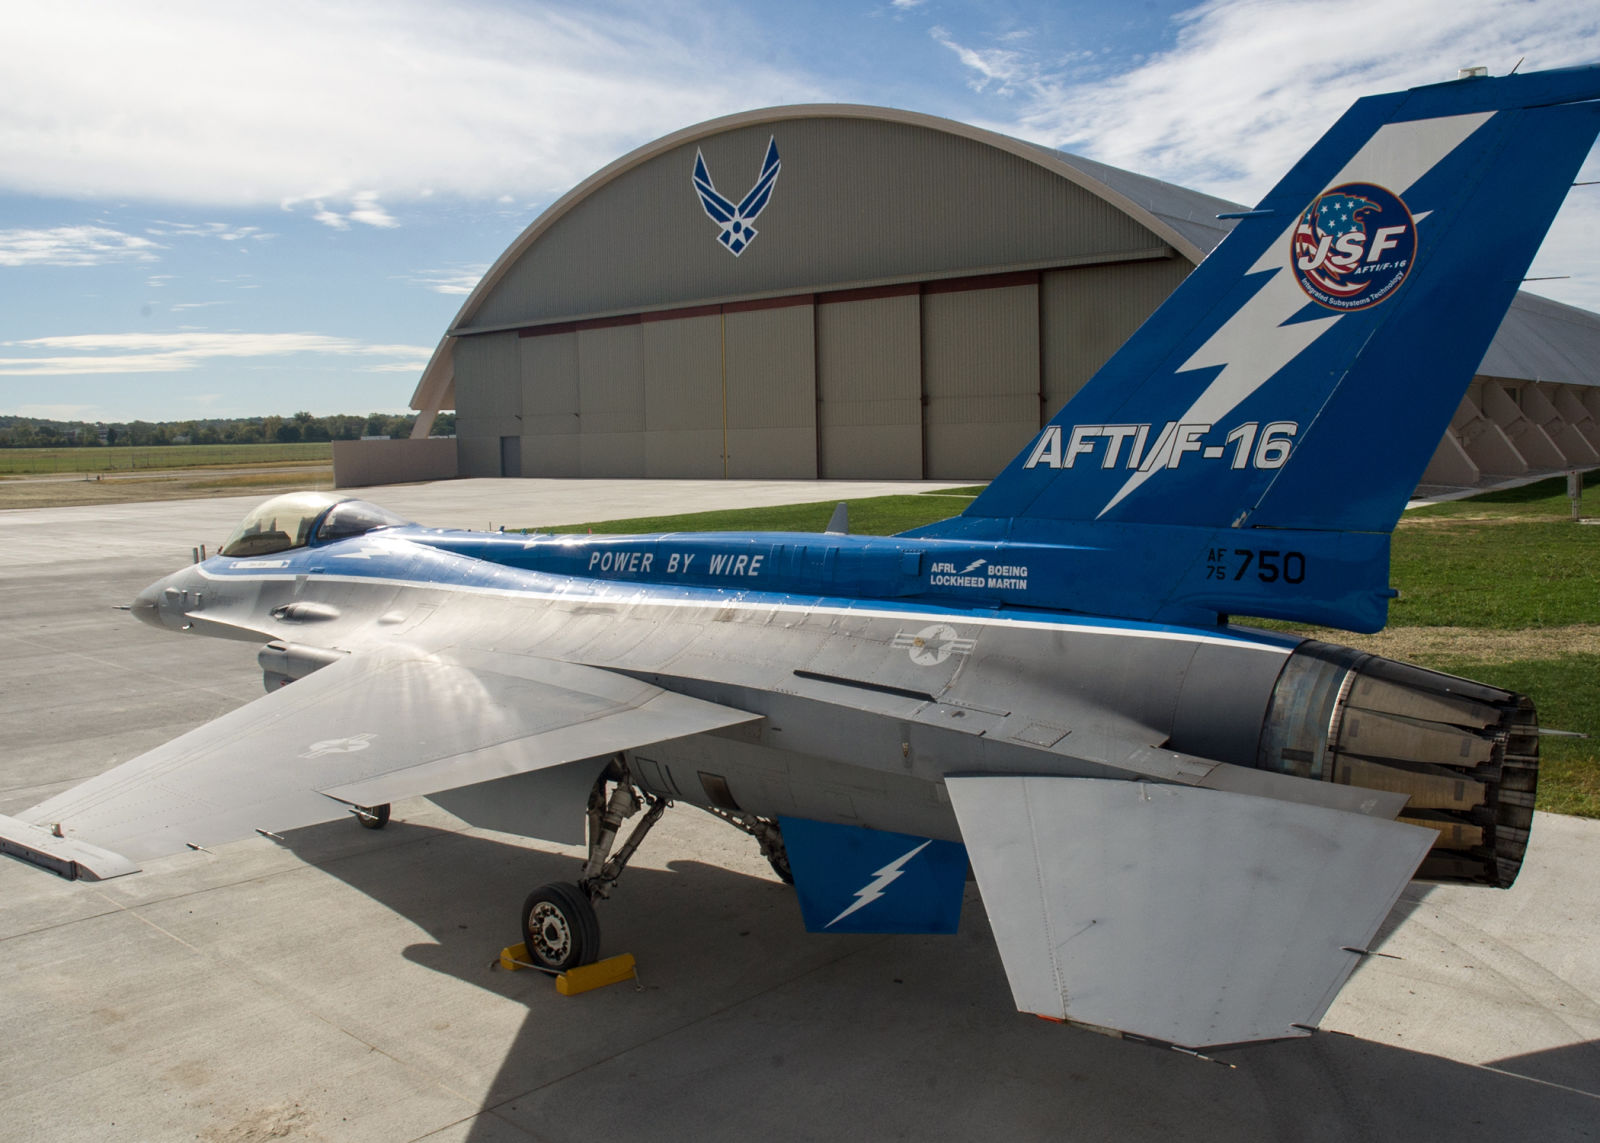 Restoration staff move the General Dynamics NF-16A AFTI into the new fourth building at the National Museum of the U.S. Air Force on 6 October, 2015.